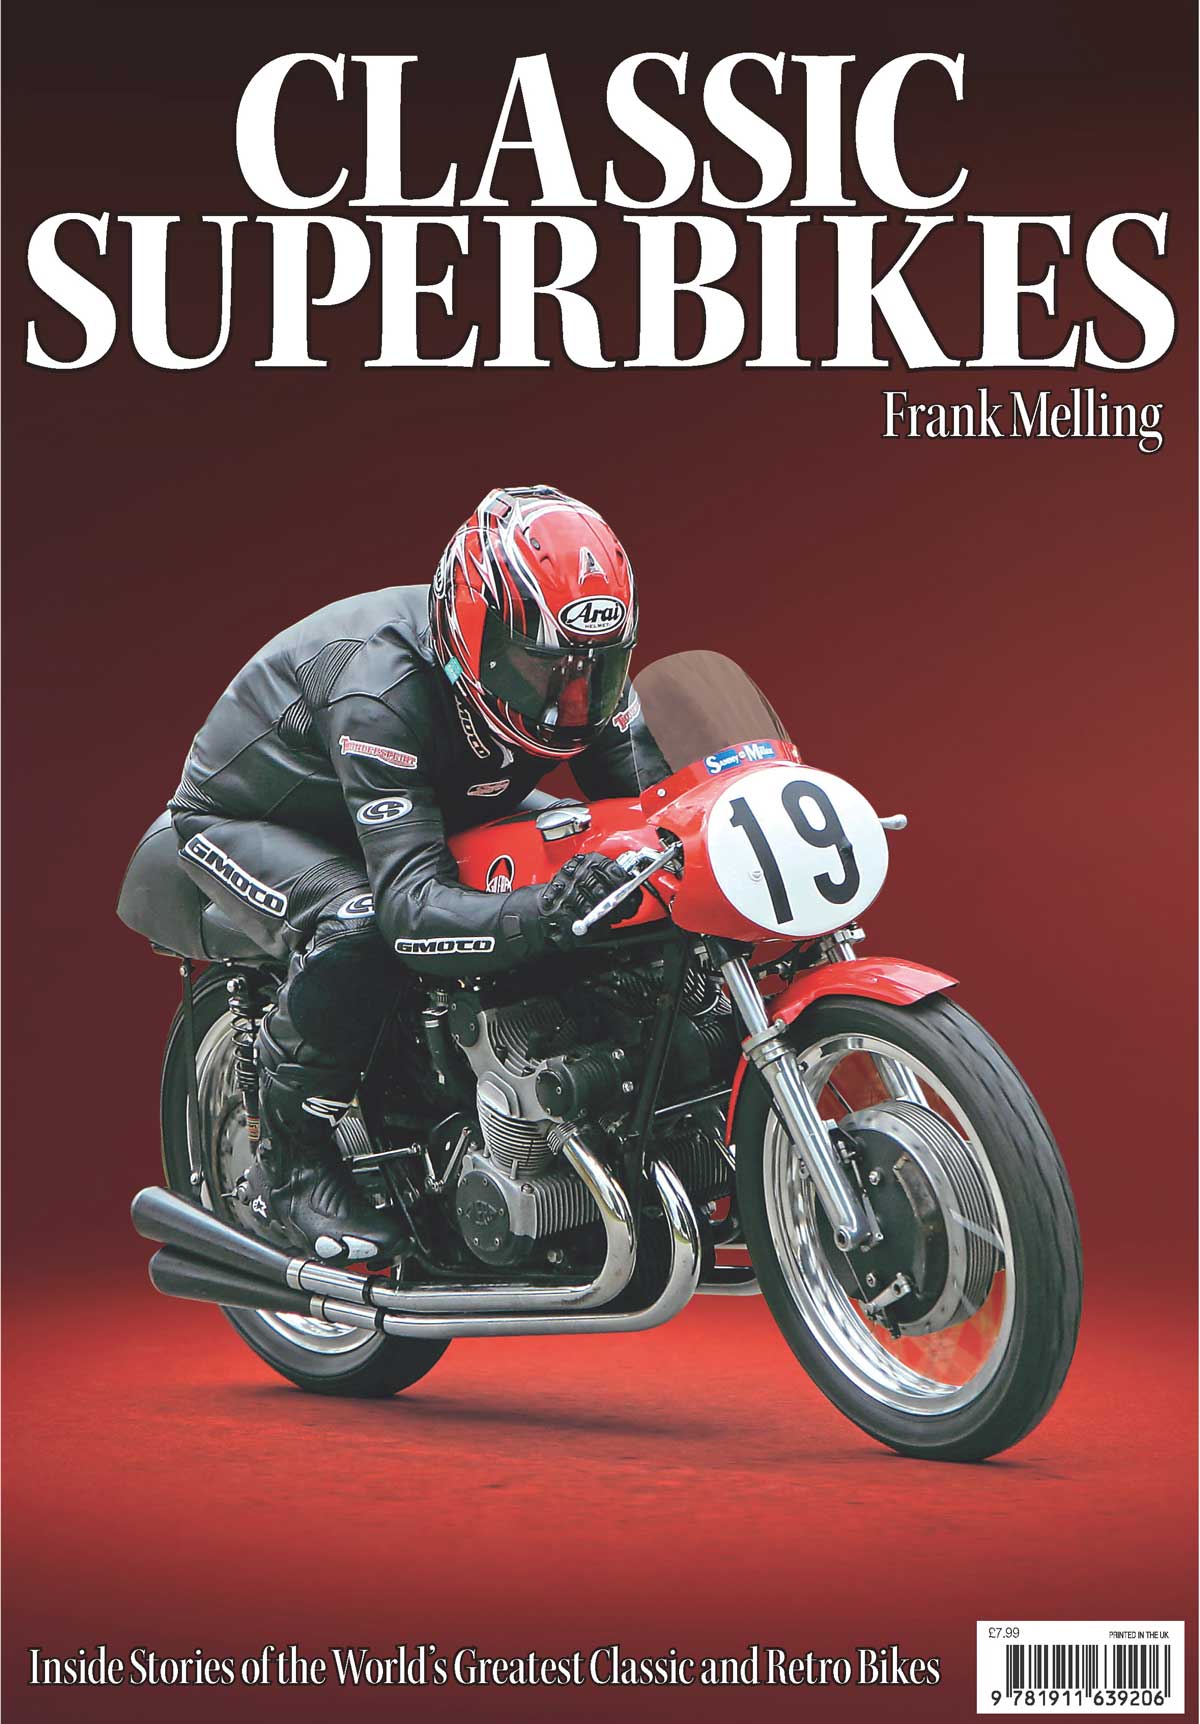 Rev your engines, Classic Superbikes by Frank Melling is here